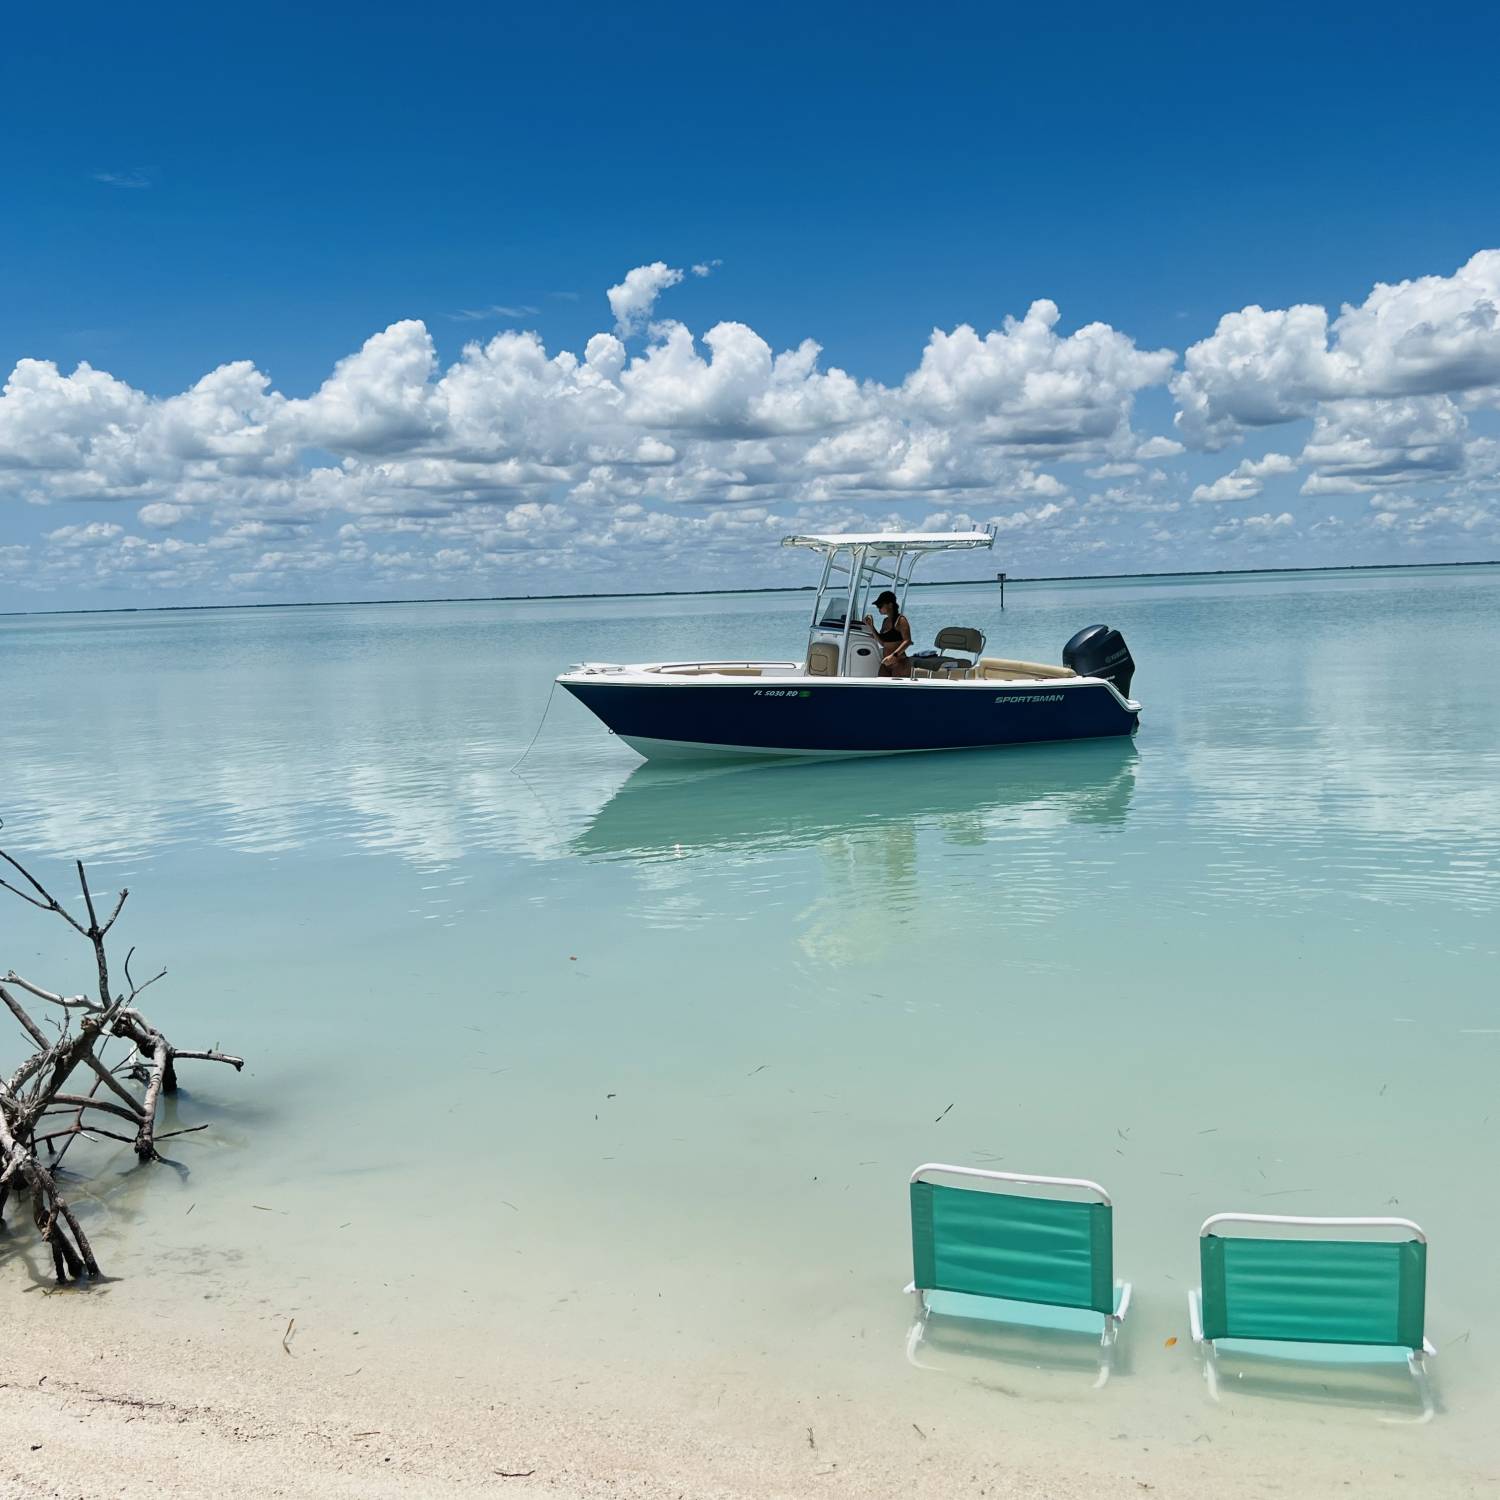 Title: Calm day at Nest Key - On board their Sportsman Heritage 211 Center Console - Location: Nest Key, Everglades National Park. Participating in the Photo Contest #SportsmanJune